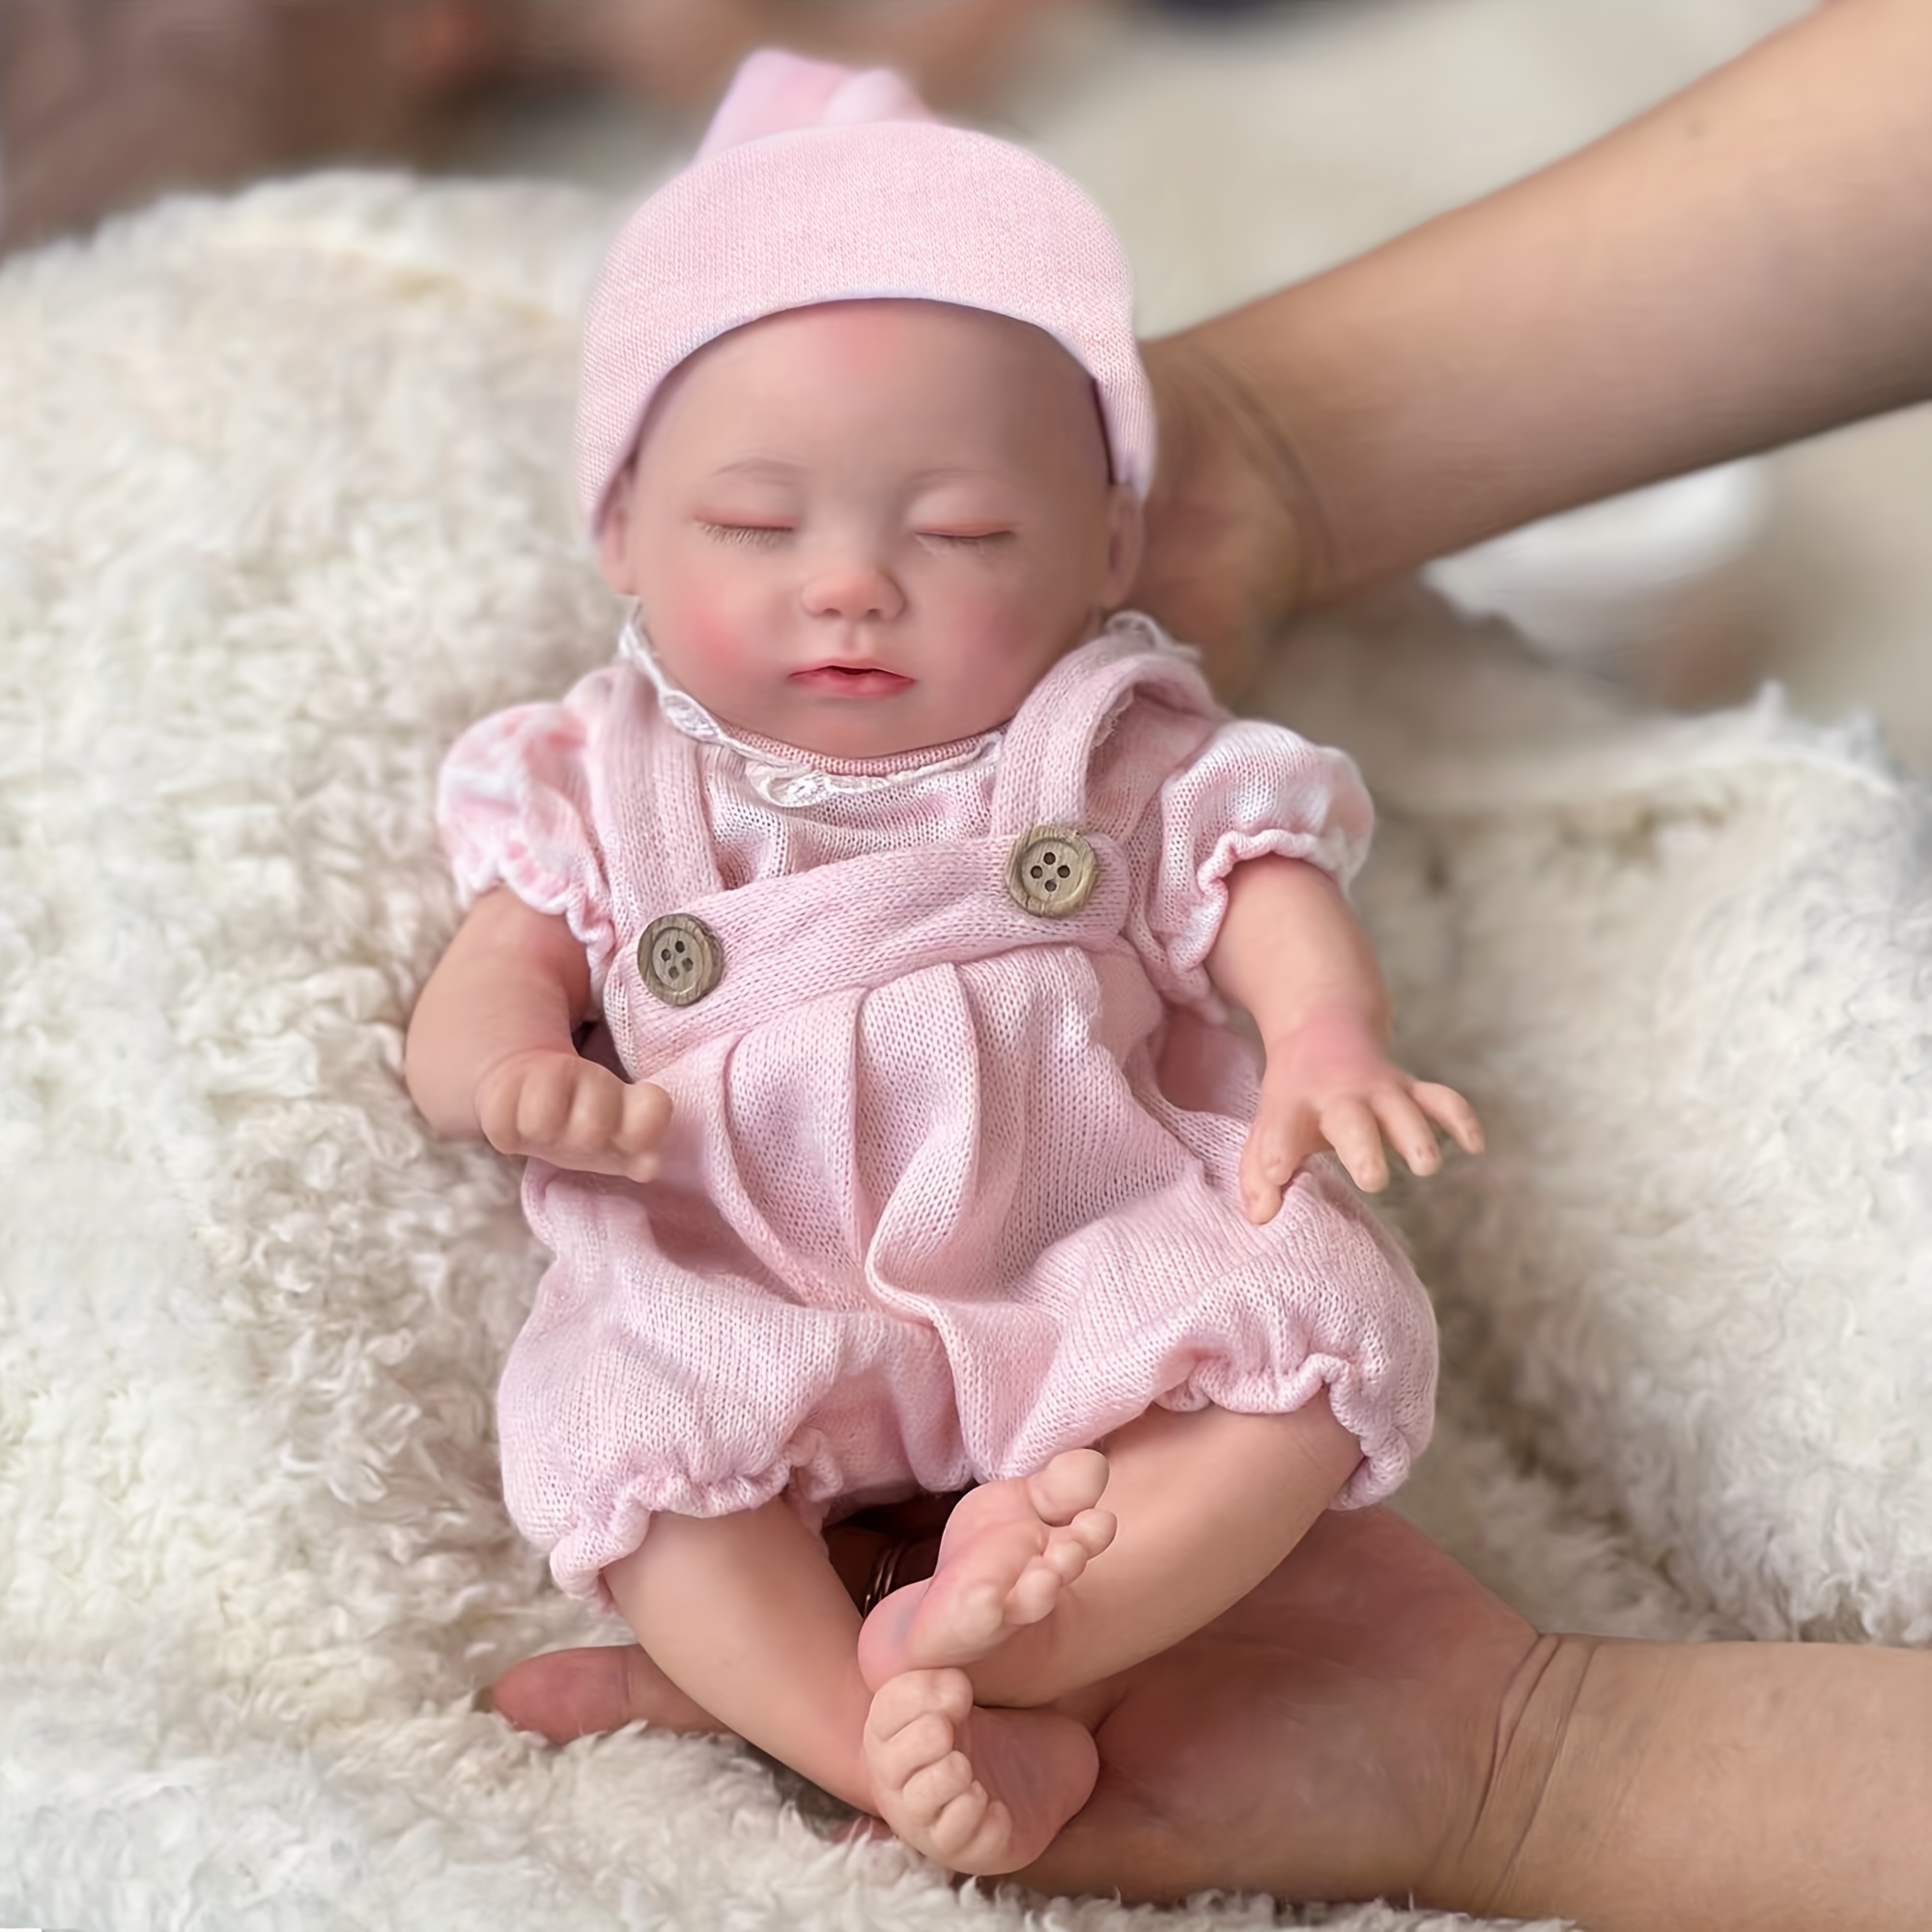 33CM Full Body Solid Silicone Girl Baby Reborn Doll Painted Real